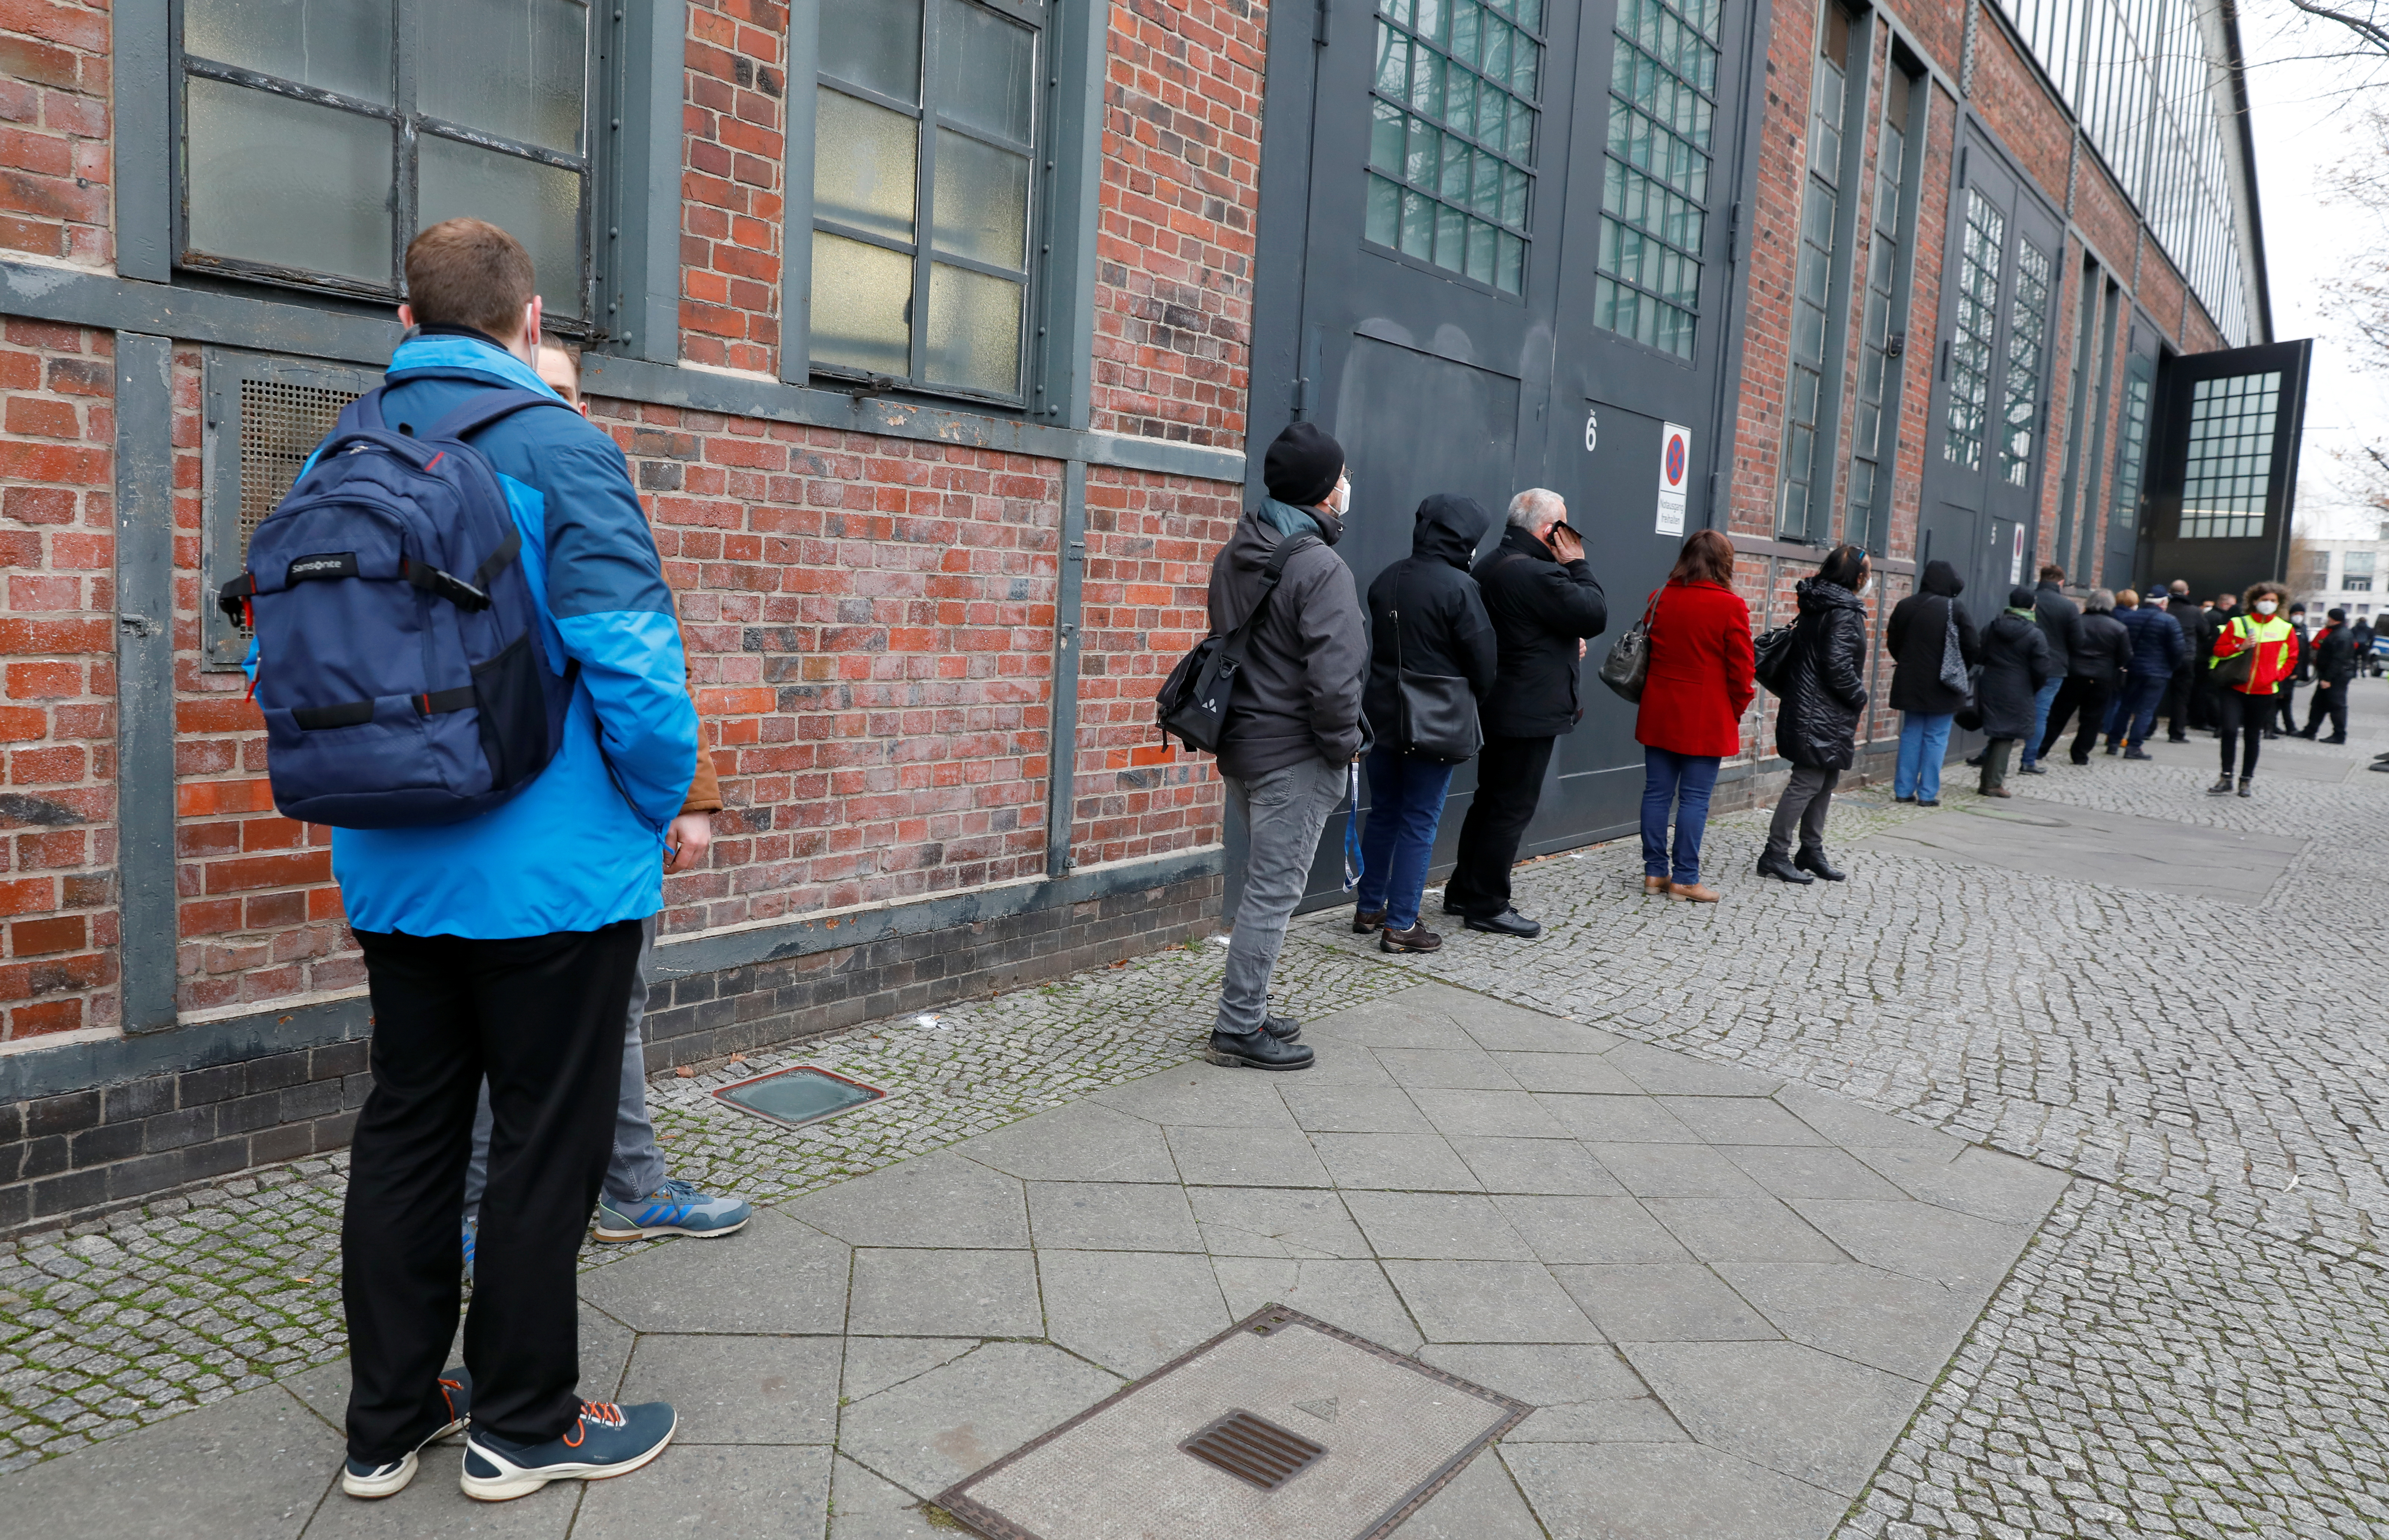 People queue to be vaccinated by the Pfizer-BioNTech COVID-19 vaccine at a coronavirus disease (COVID-19) vaccination centre in Berlin, Germany, December 26, 2020. REUTERS/Michele Tantussi